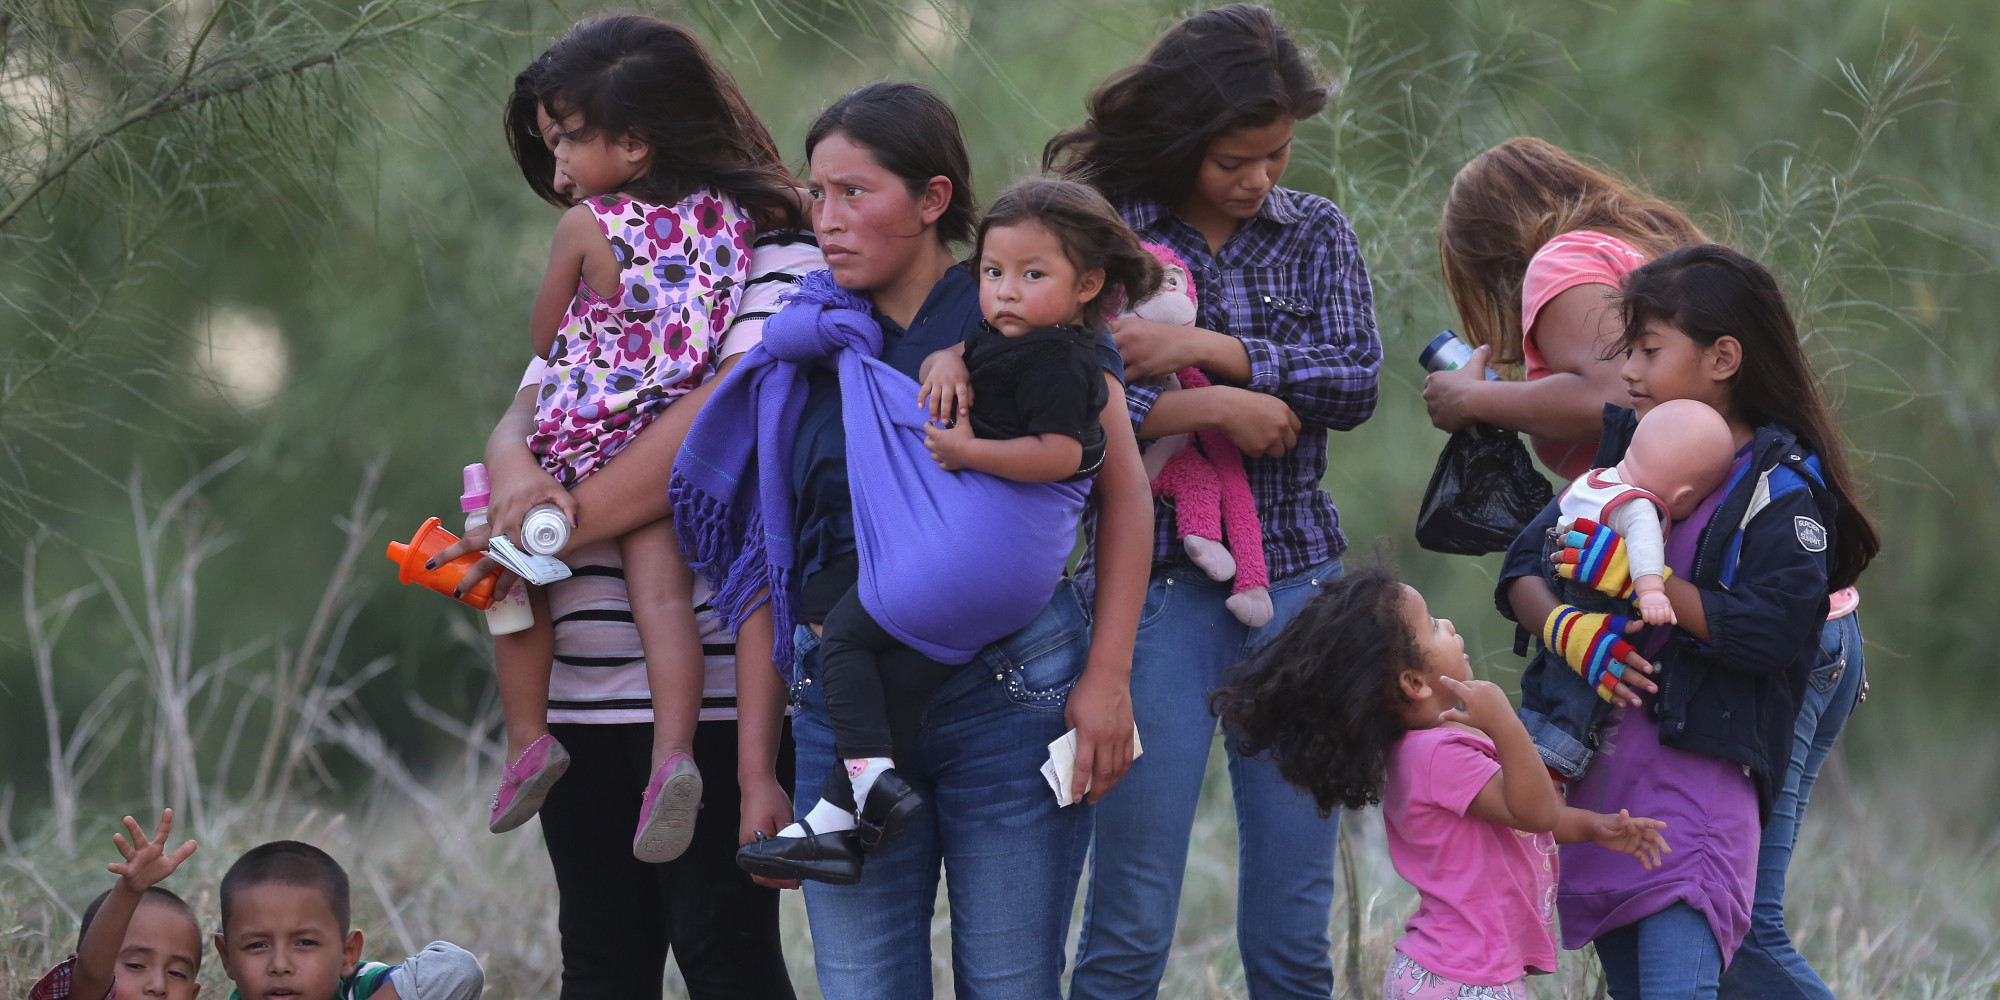 80% Of Central American Women, Girls Are Raped Crossing Into The U.S.